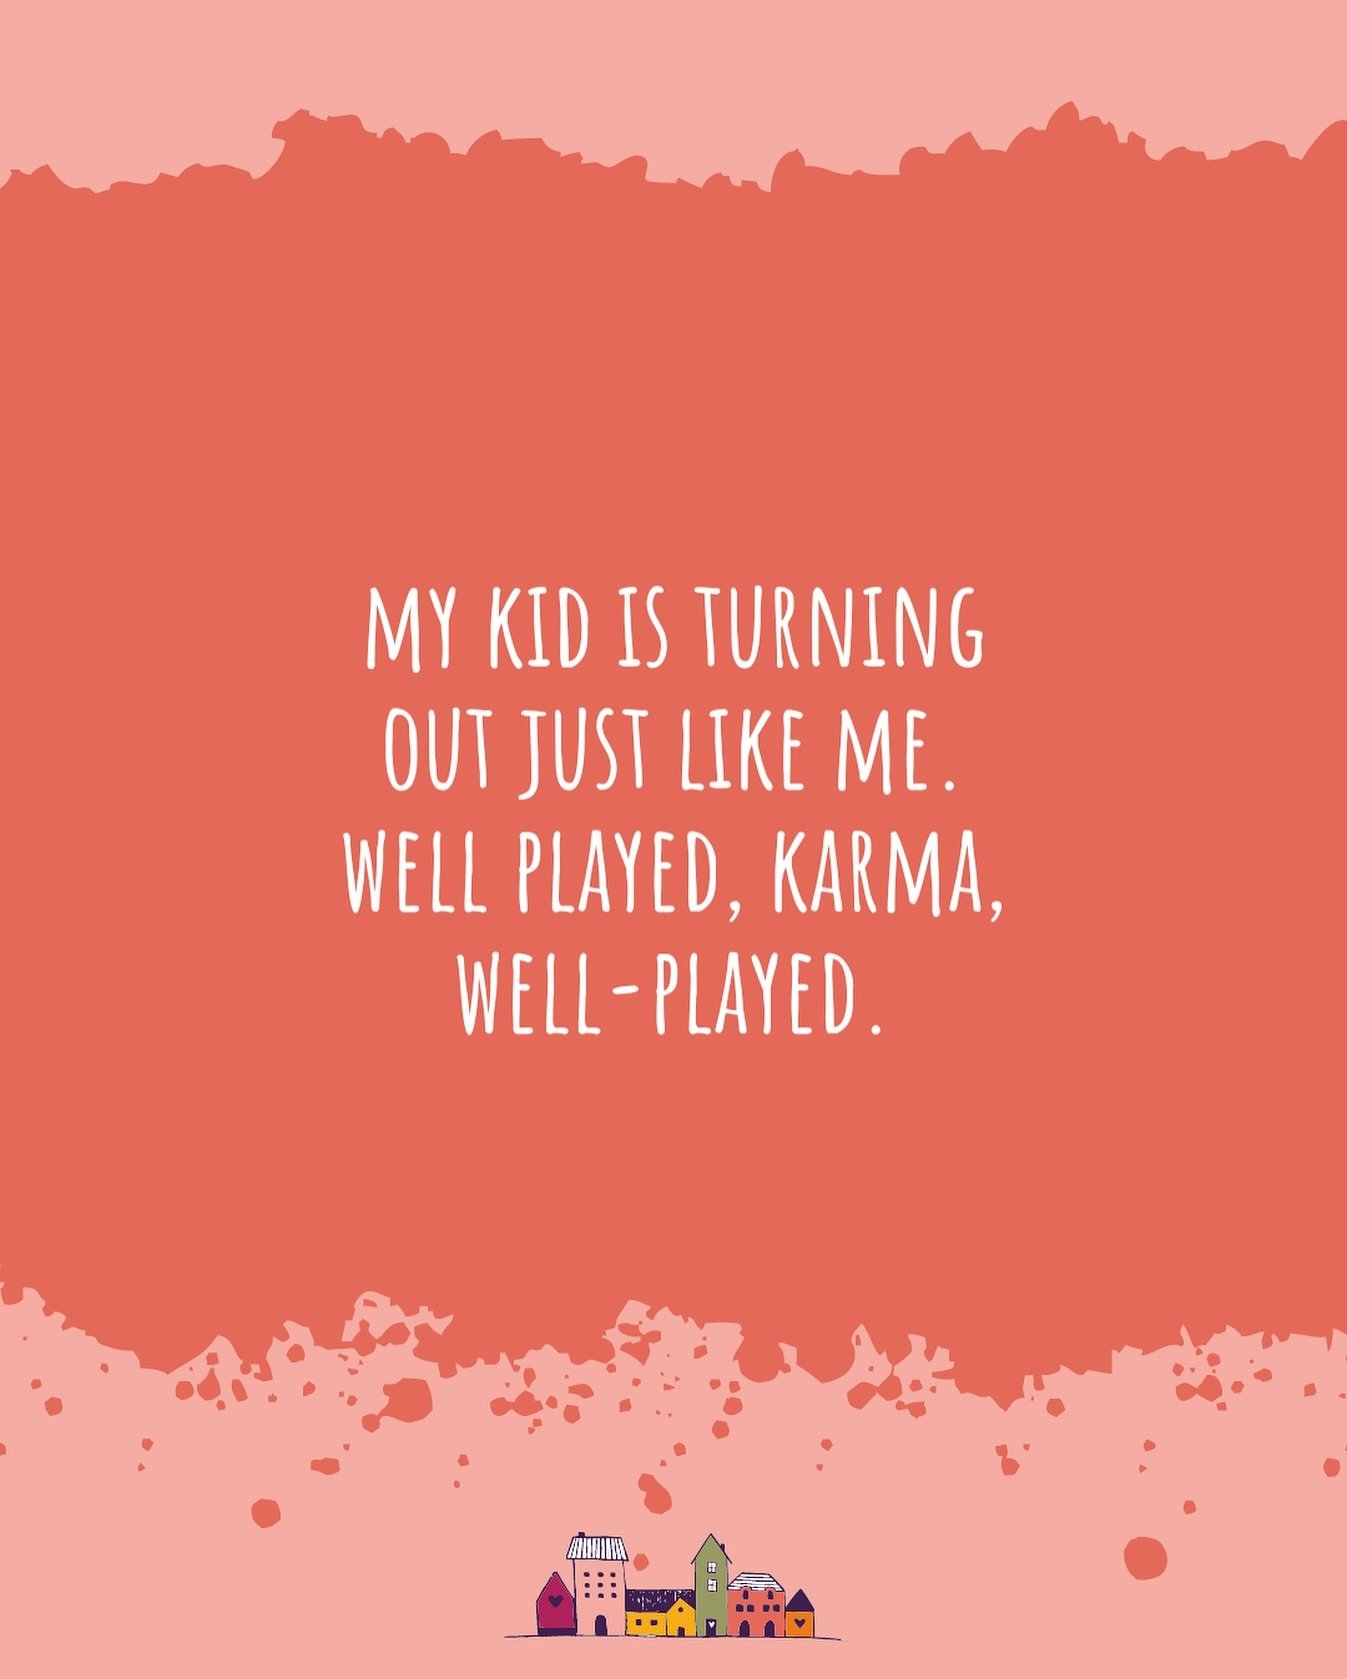 How often have we ended up saying this! ⬆️🤣

Share to your stories if you agree 👍

#parentpractice #parentinghumor #parenting101 #parentingfunny